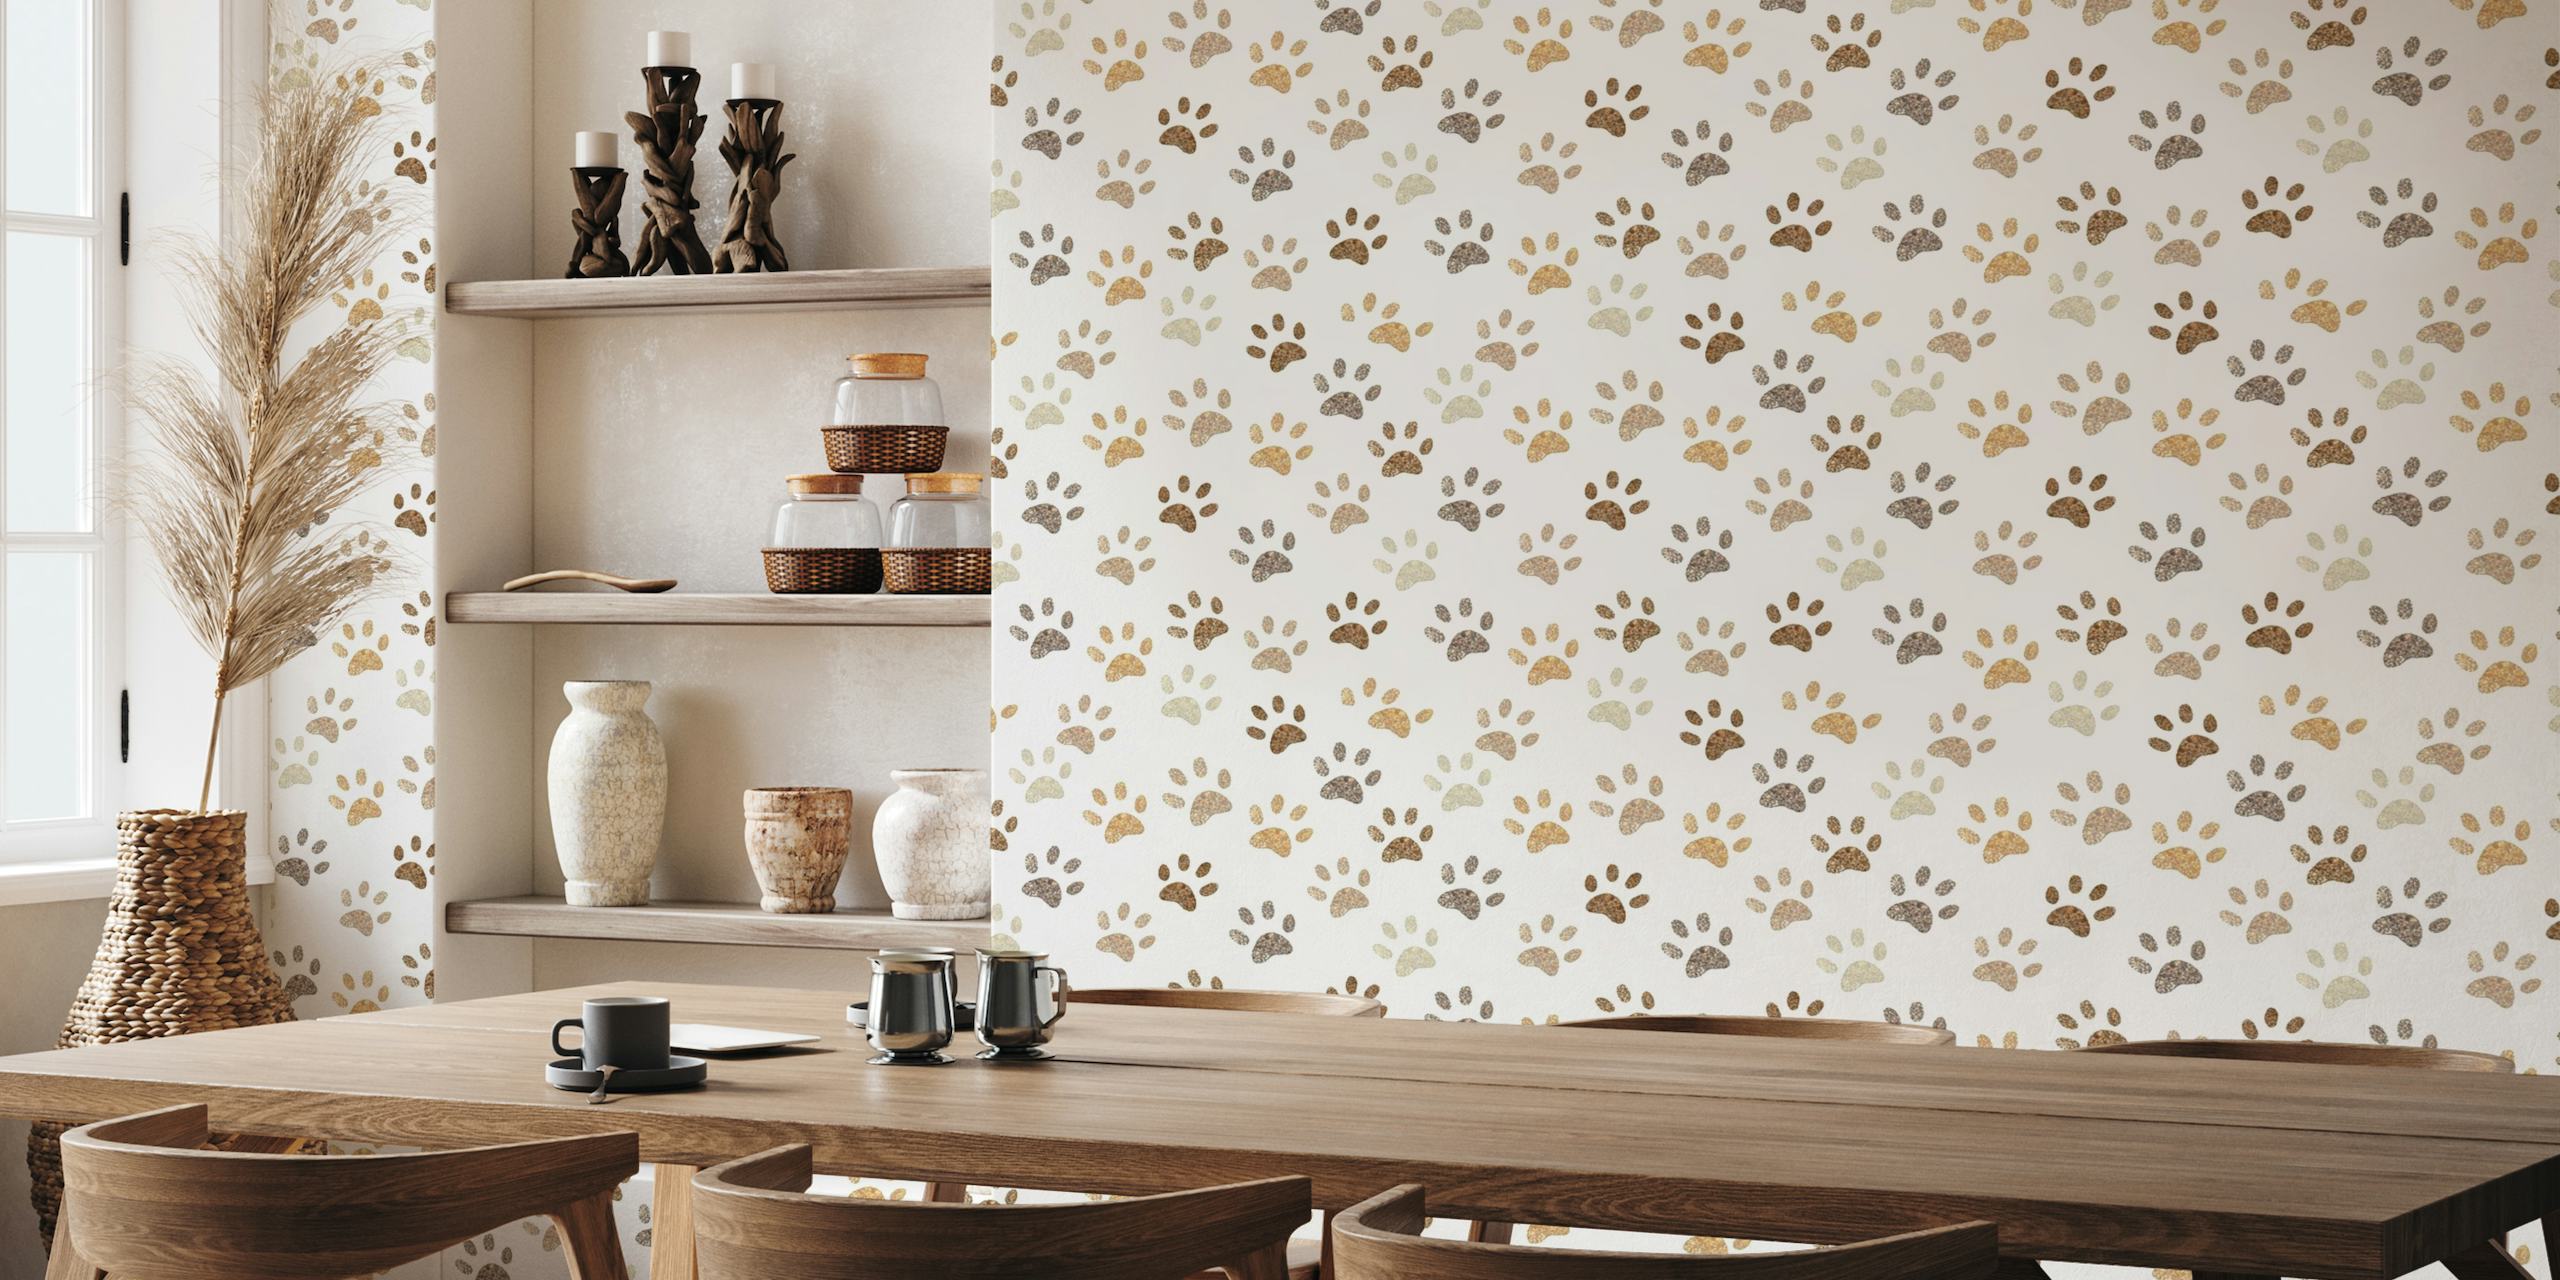 Shining brown colored paw print wallpaper